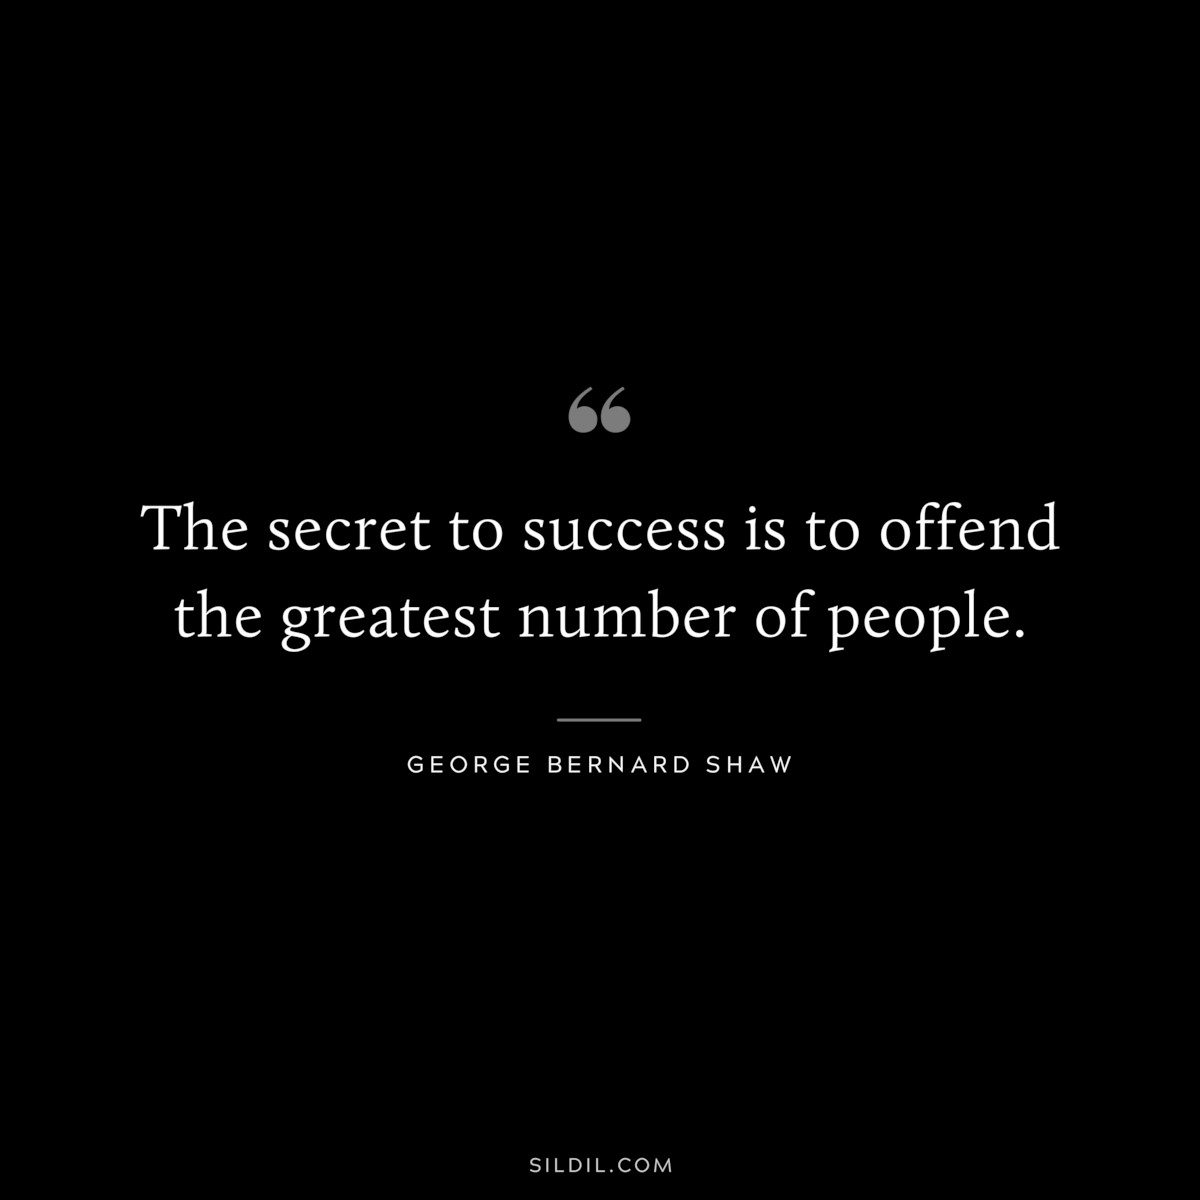 The secret to success is to offend the greatest number of people. ― George Bernard Shaw